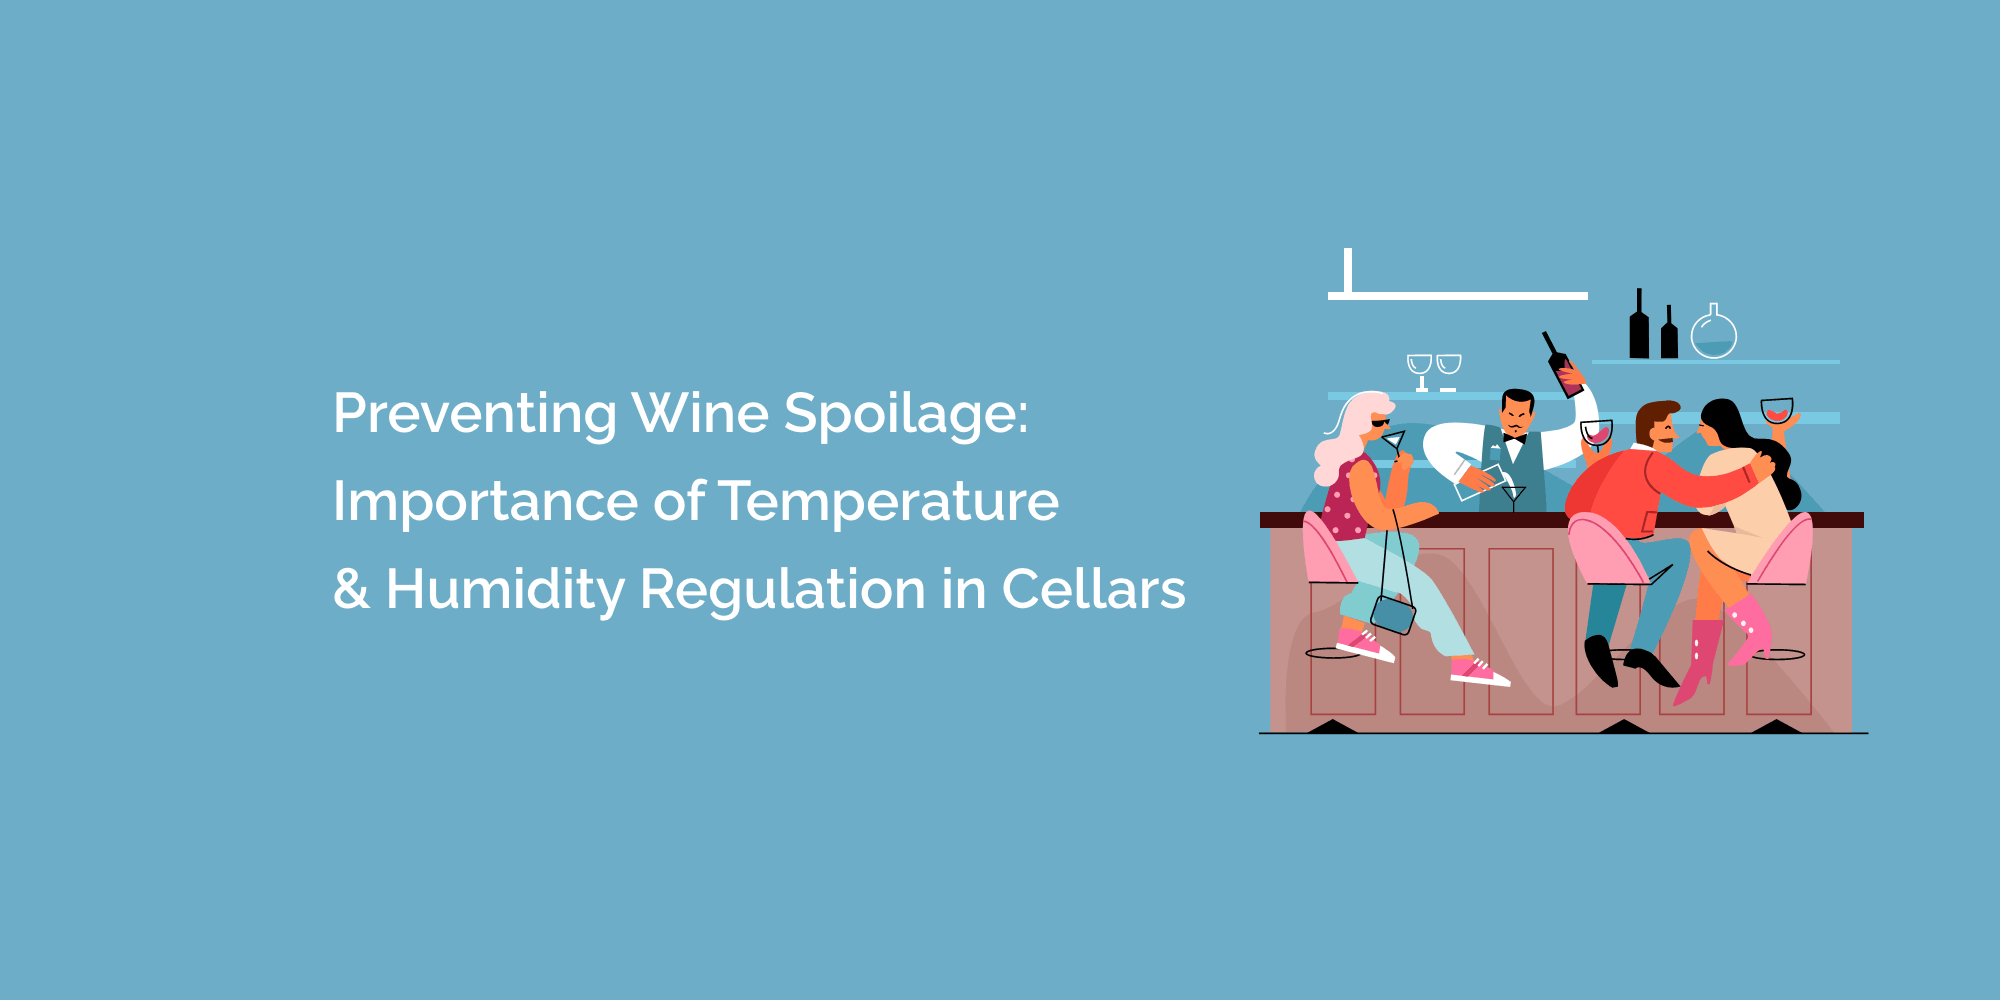 Preventing Wine Spoilage: Importance of Temperature and Humidity Regulation in Cellars